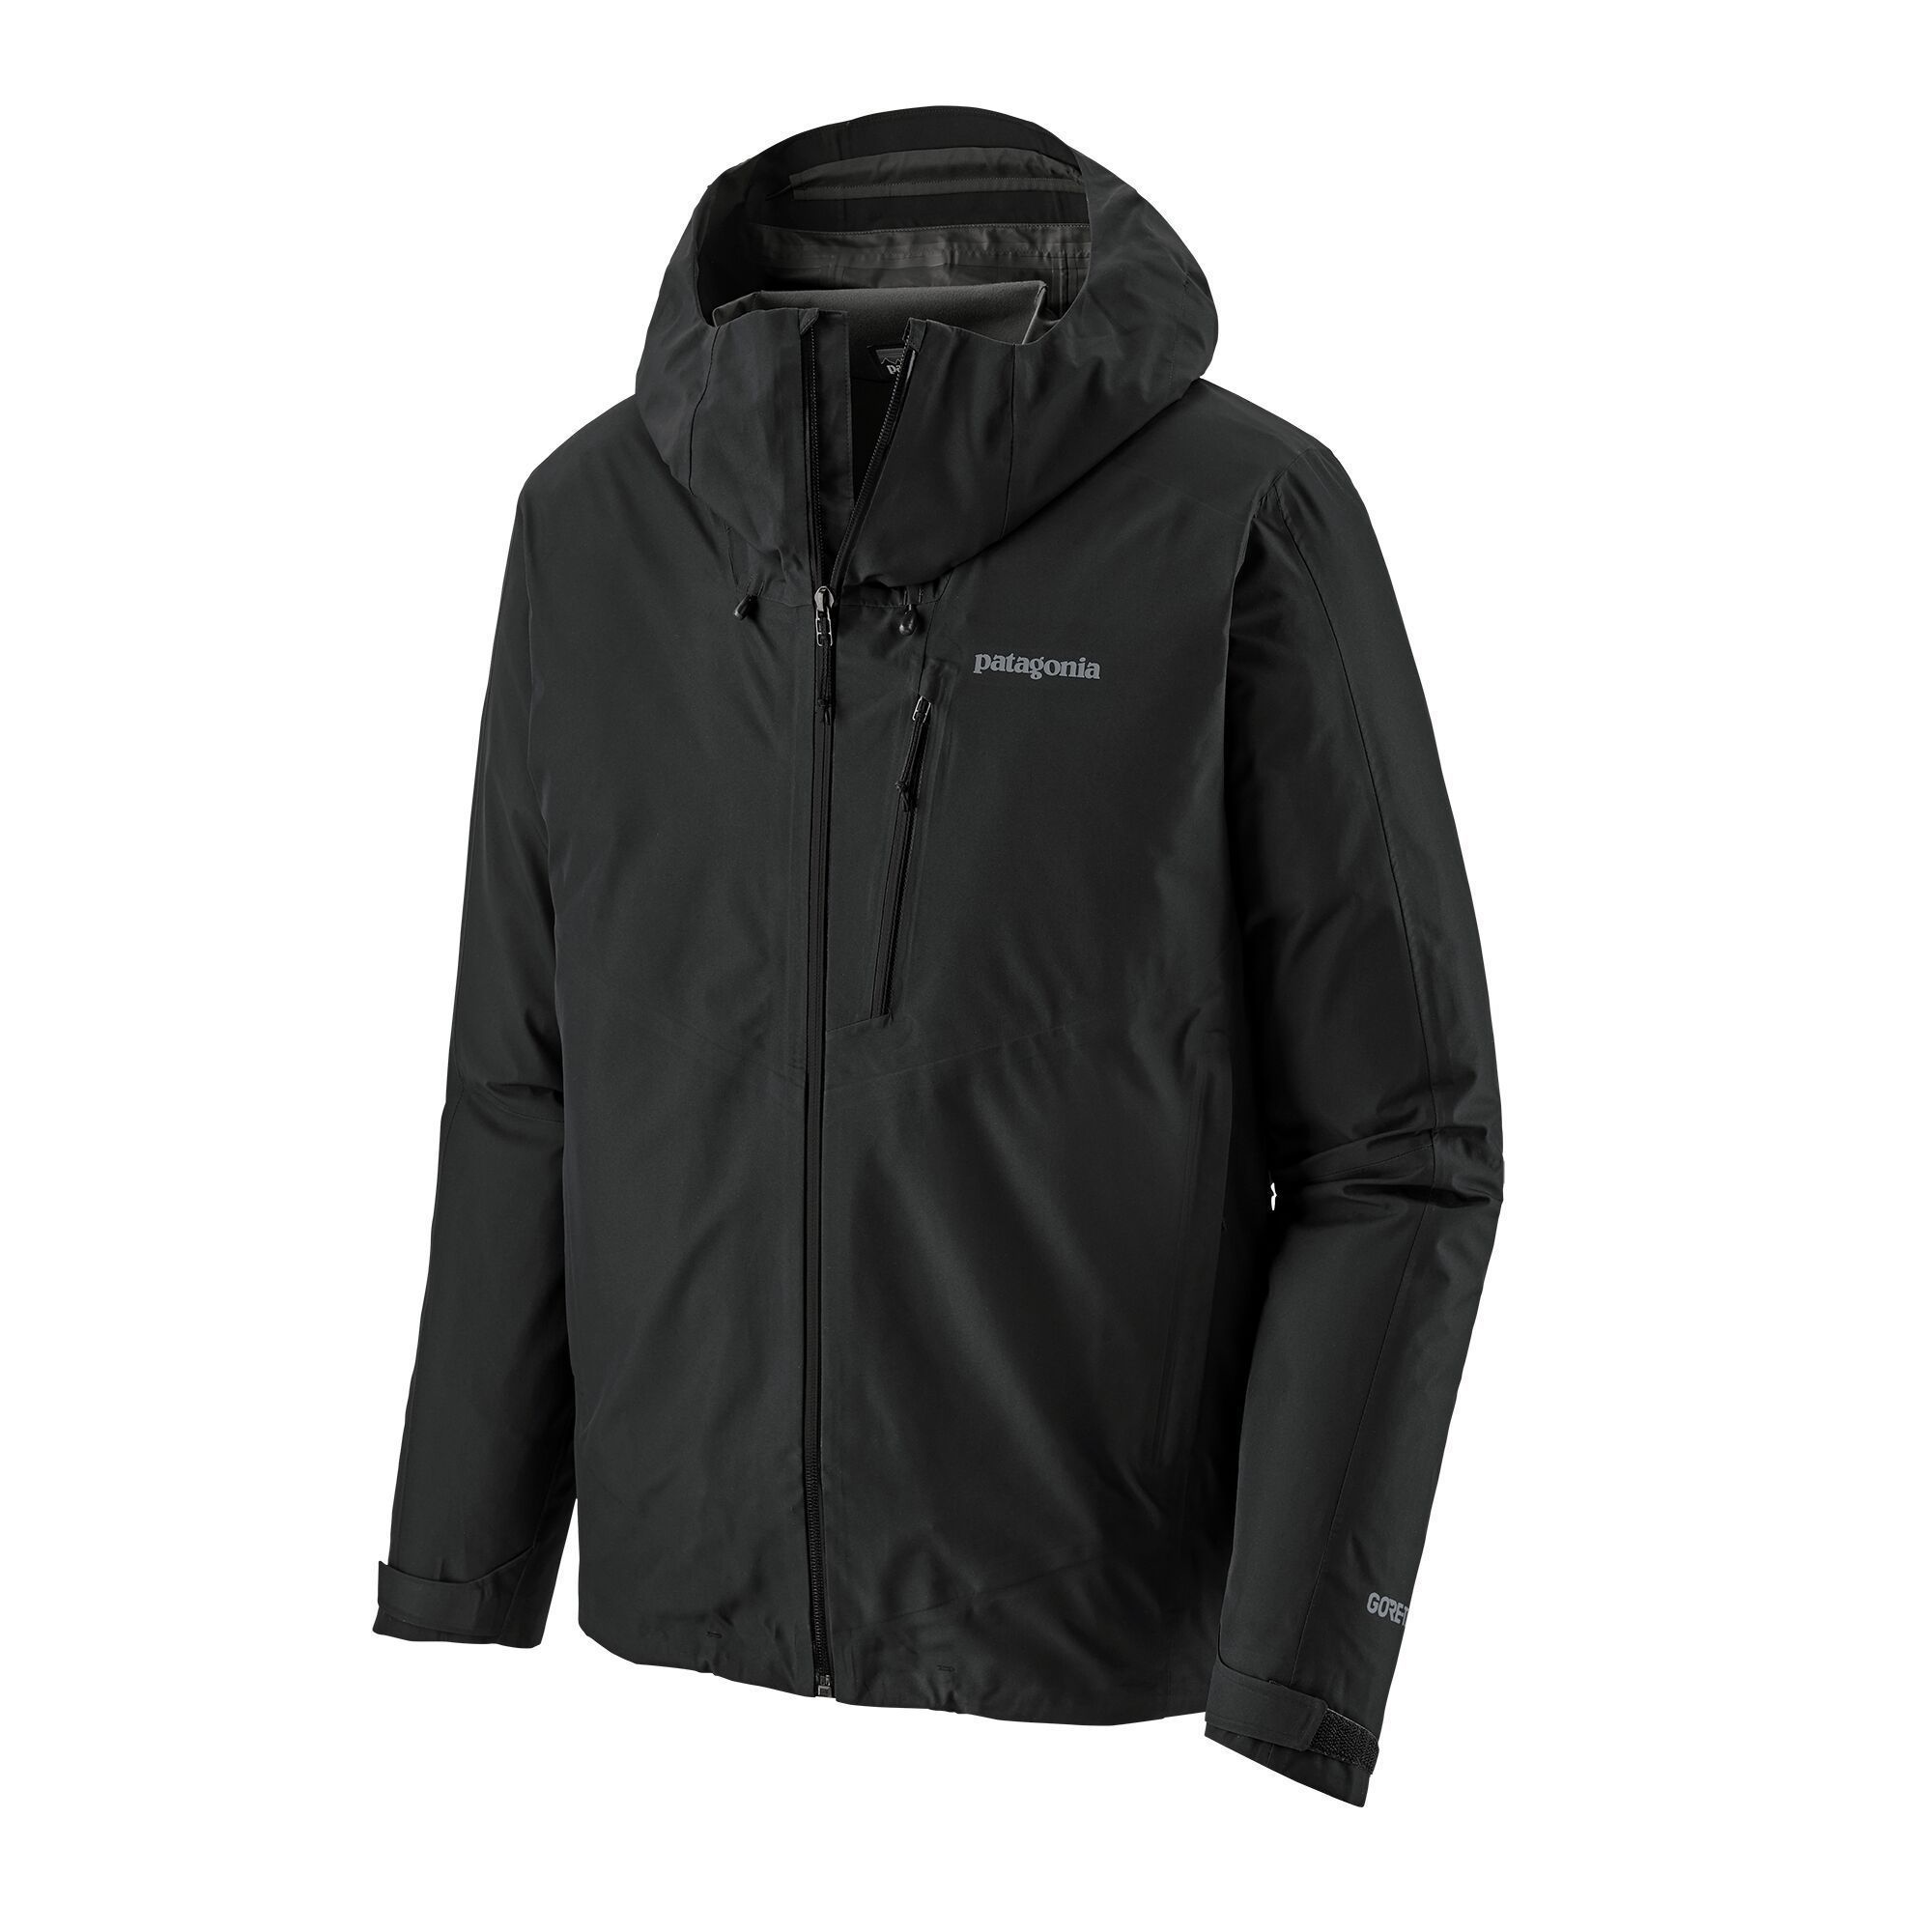 Patagonia Men's Calcite Shell Jacket - Gore-Tex - 100% Recycled Polyester, Black / S